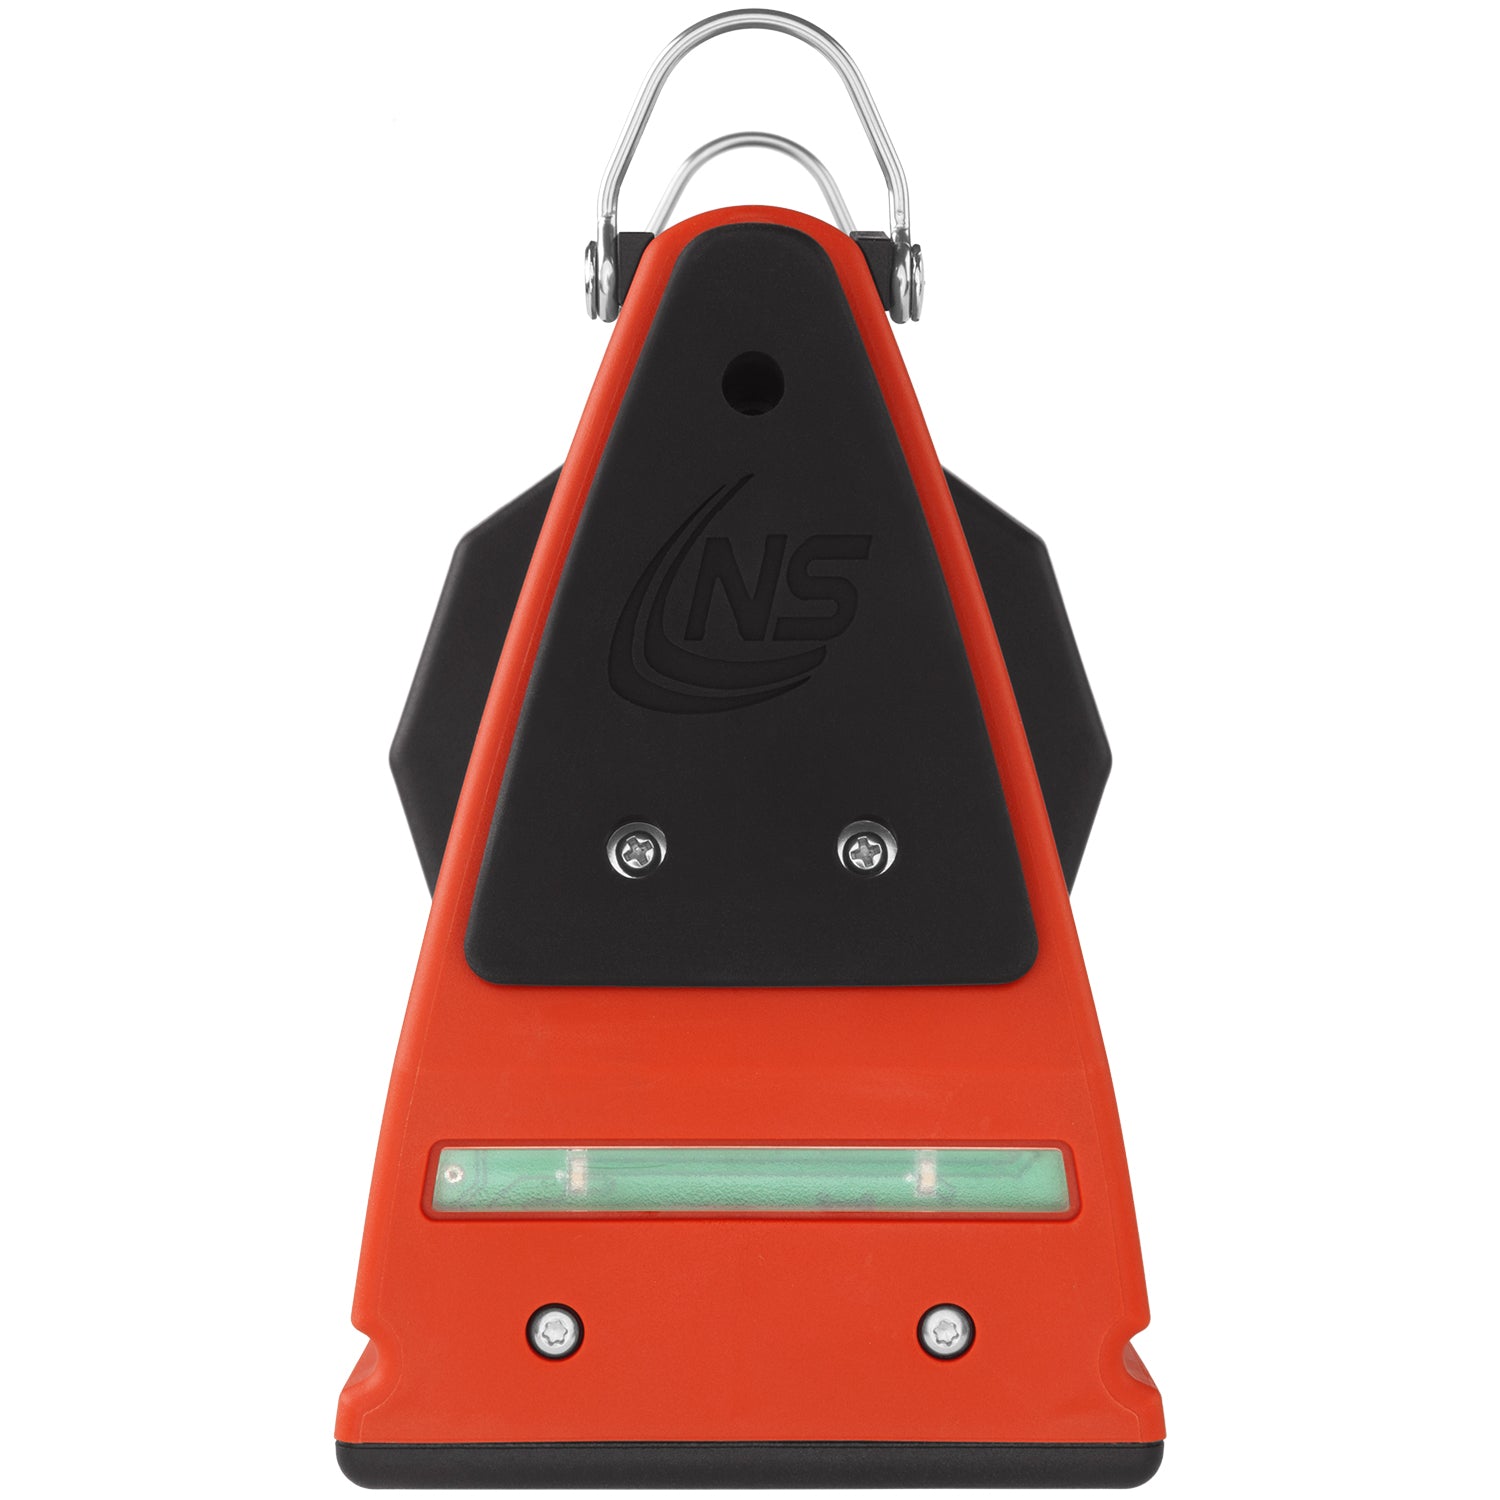 NightStick XPR-5582RX INTEGRITAS 82 Intrinsically Safe Lantern w/ Articulating Head - Rechargeable